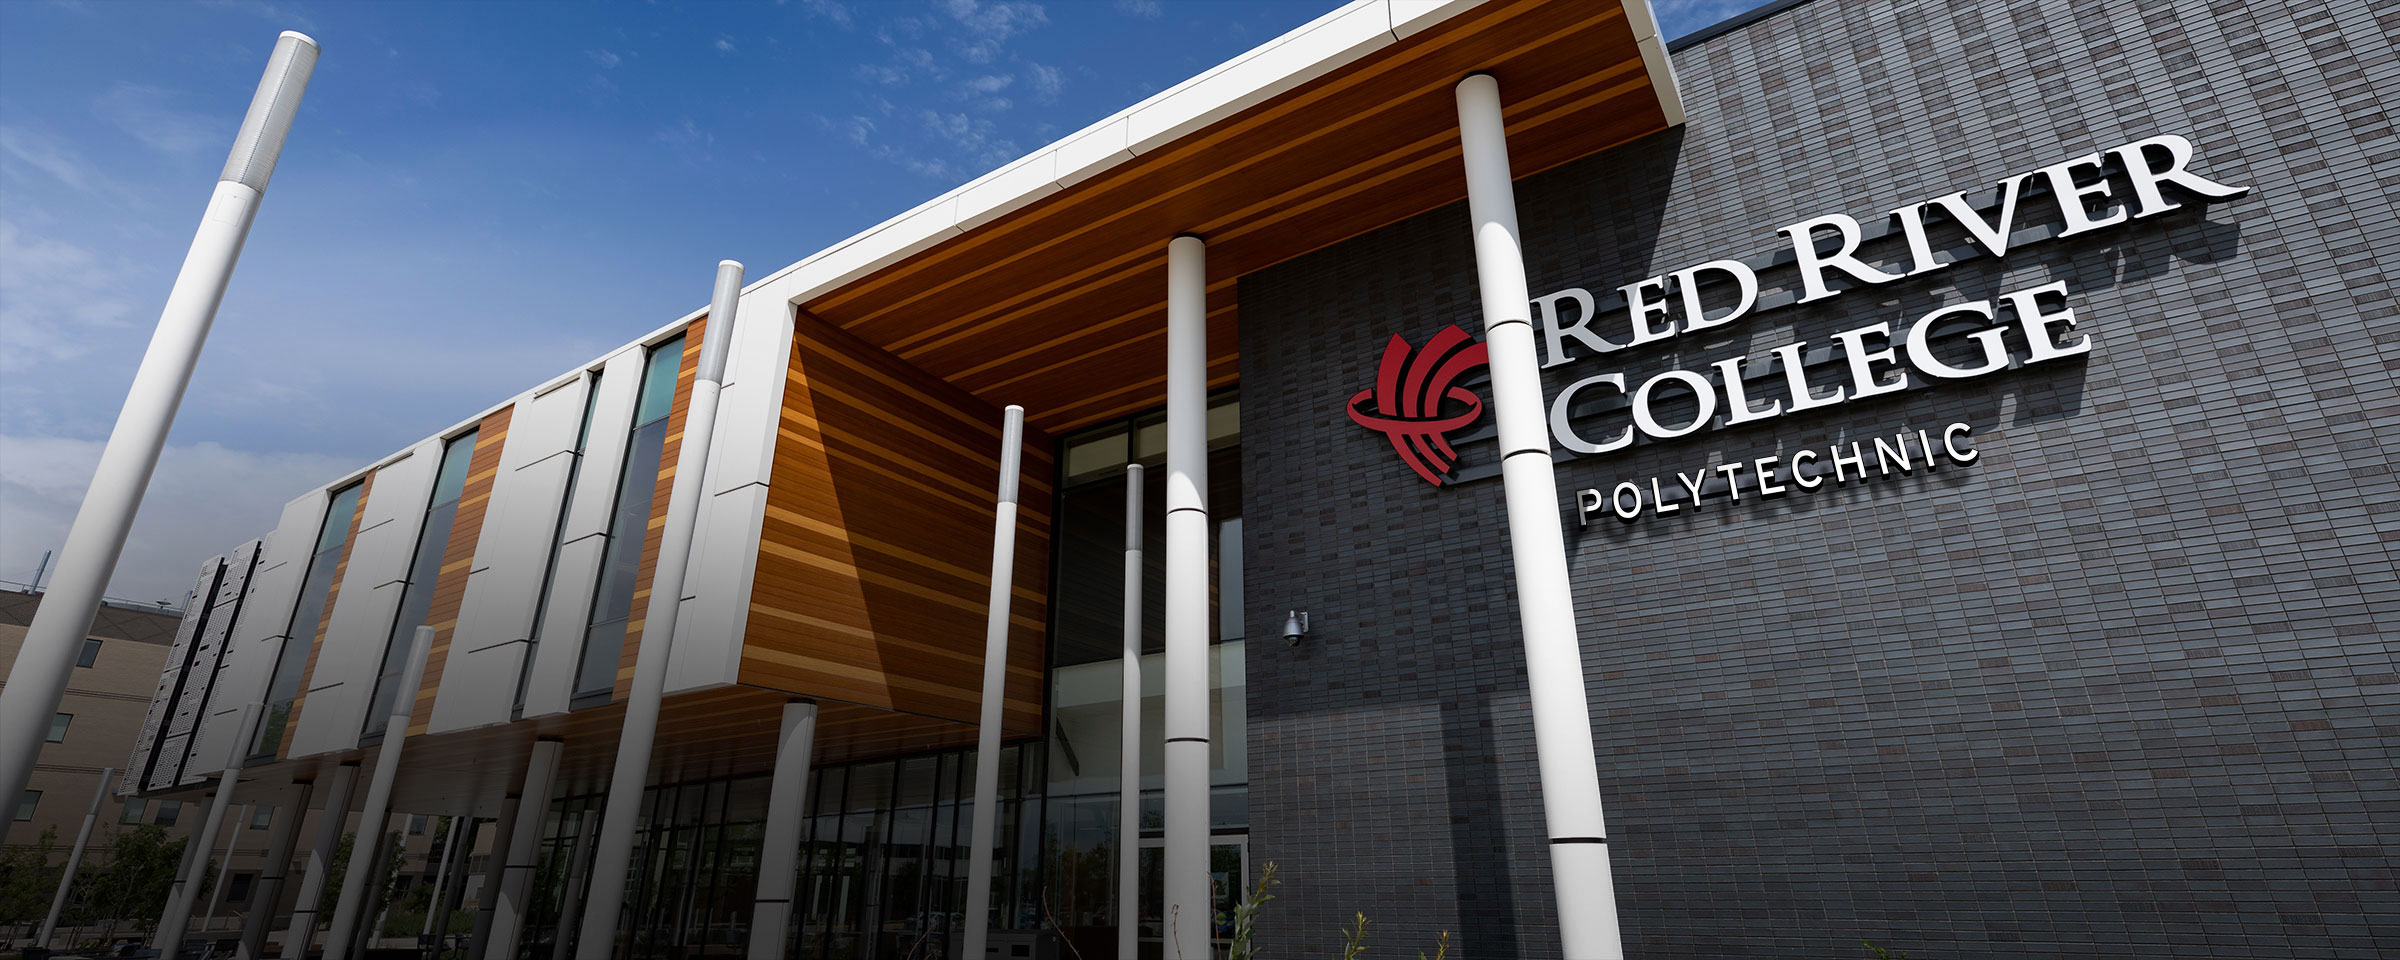 Red River College Polytechnic sign